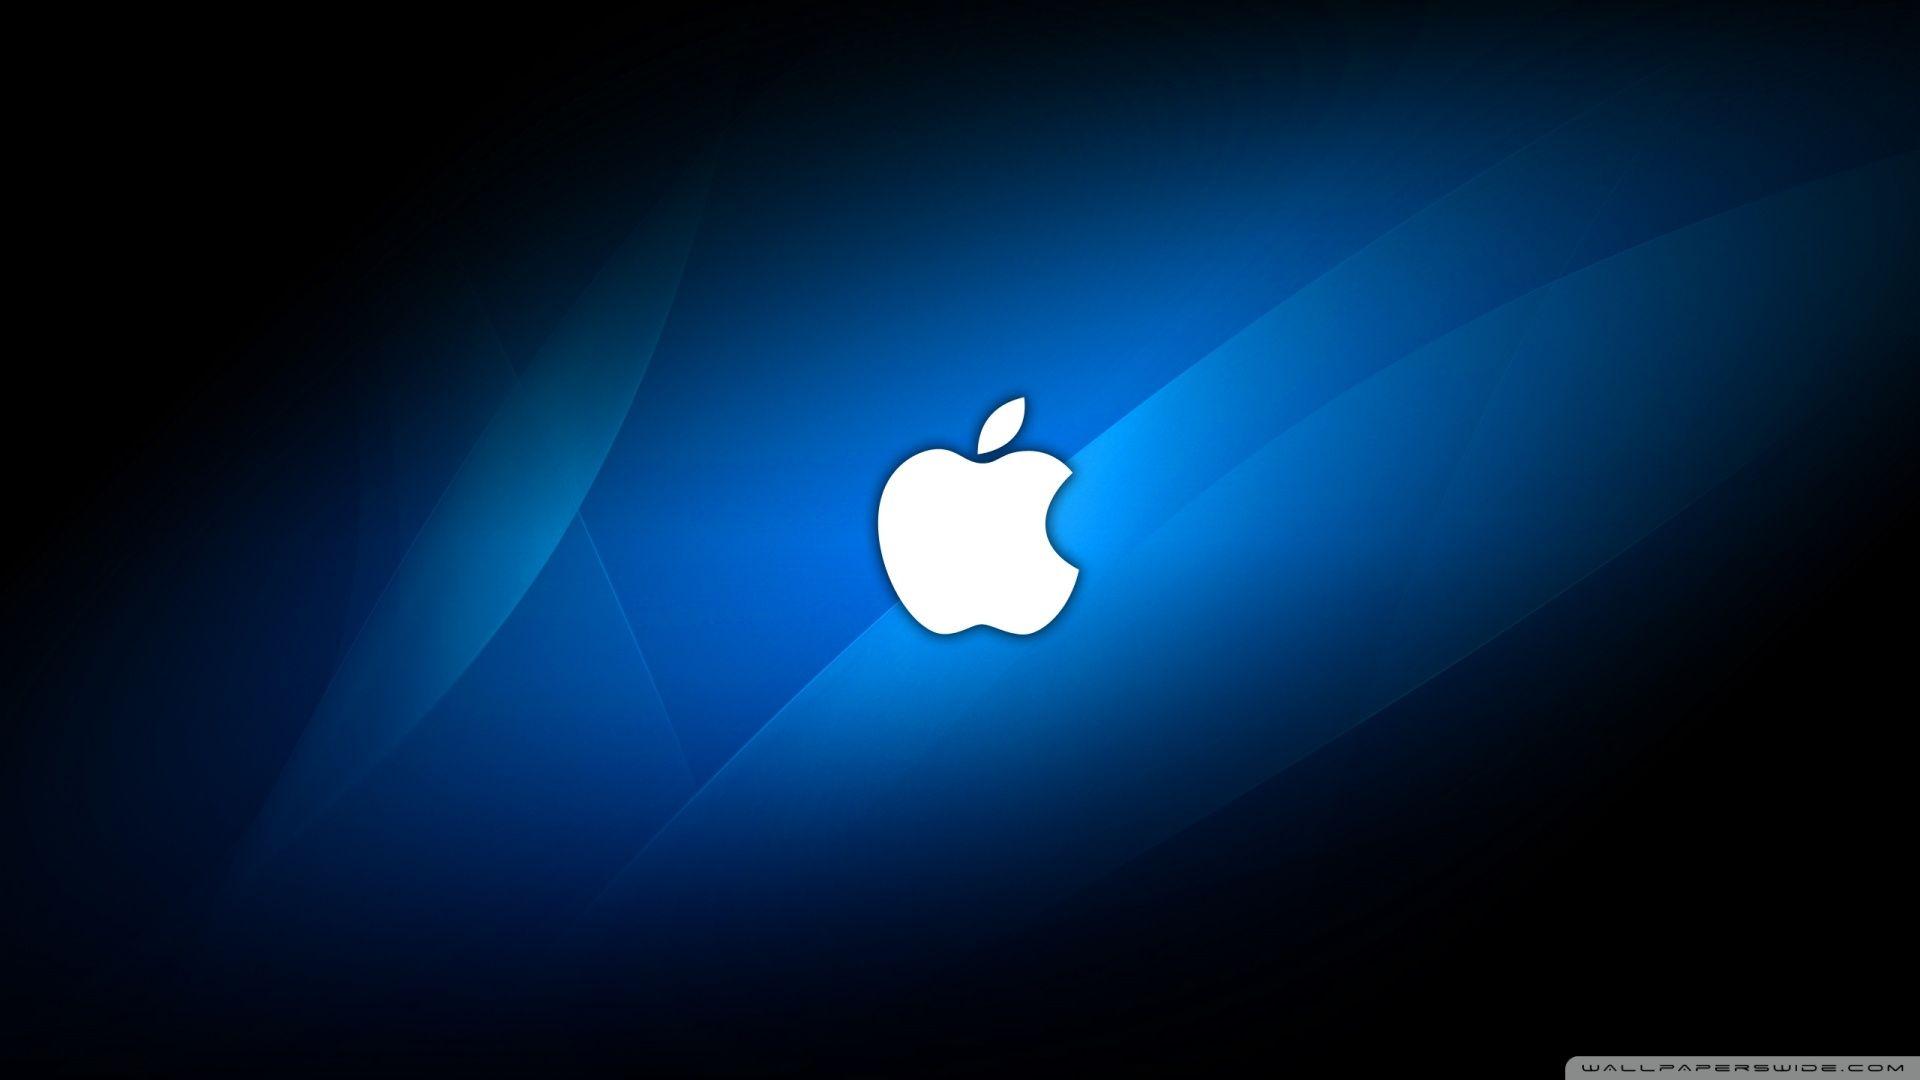 Download Cool Apple Wallpapers 1920x1080